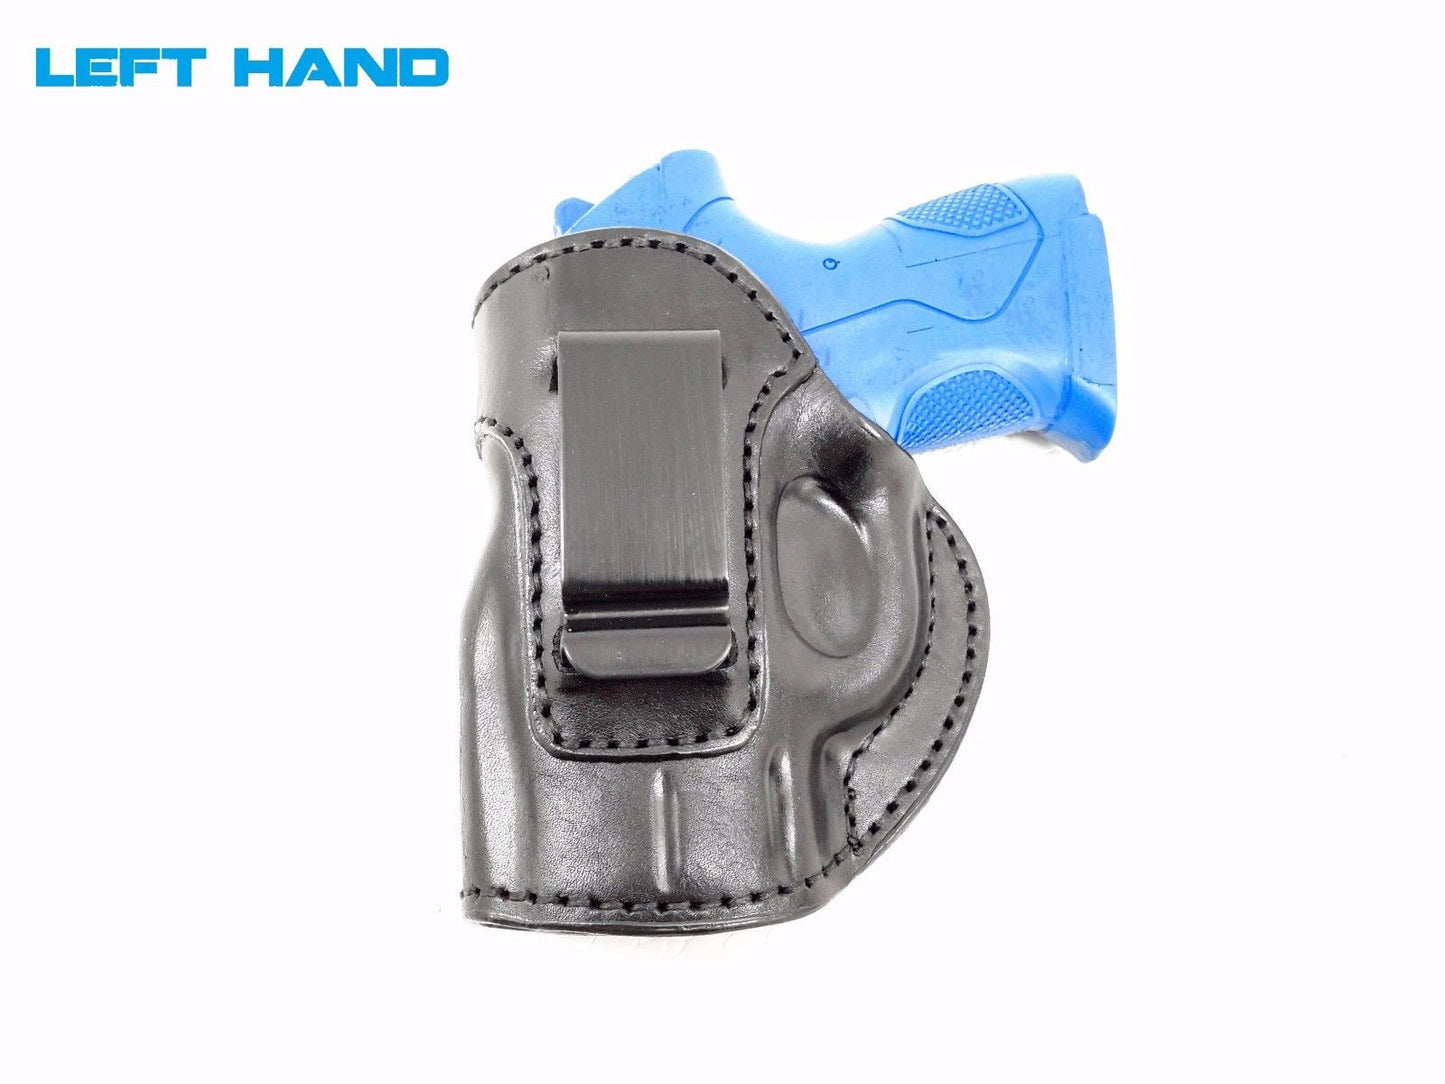 Springfield XD Mod.2 9mm Sub-Compact IWB Inside the Waistband Holster